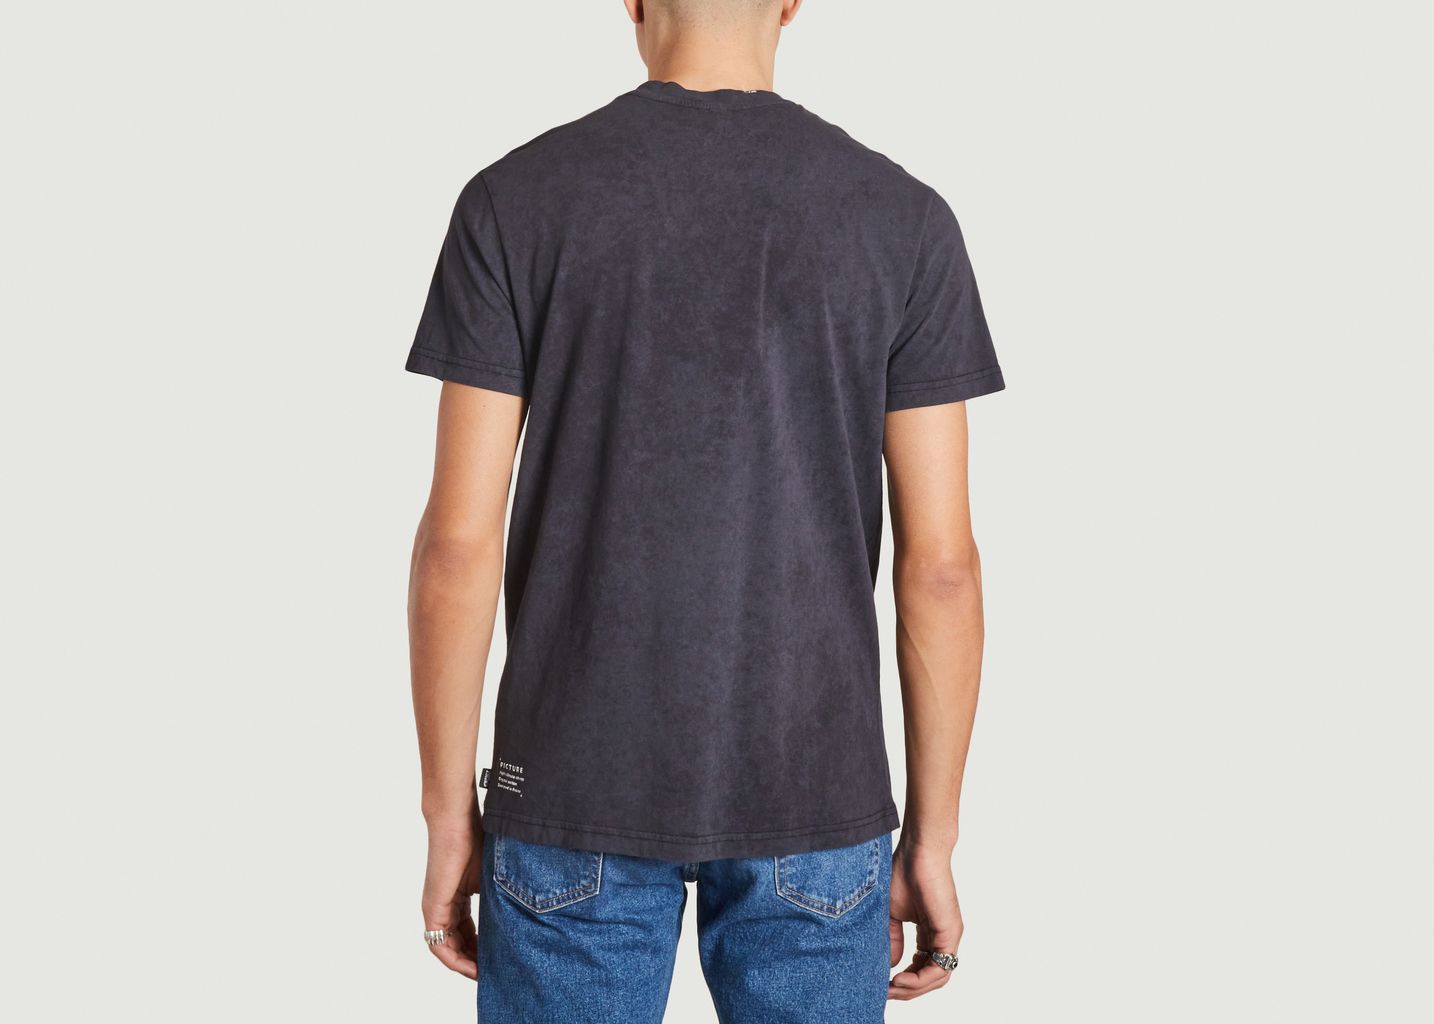 Cowley T-shirt - Picture Organic